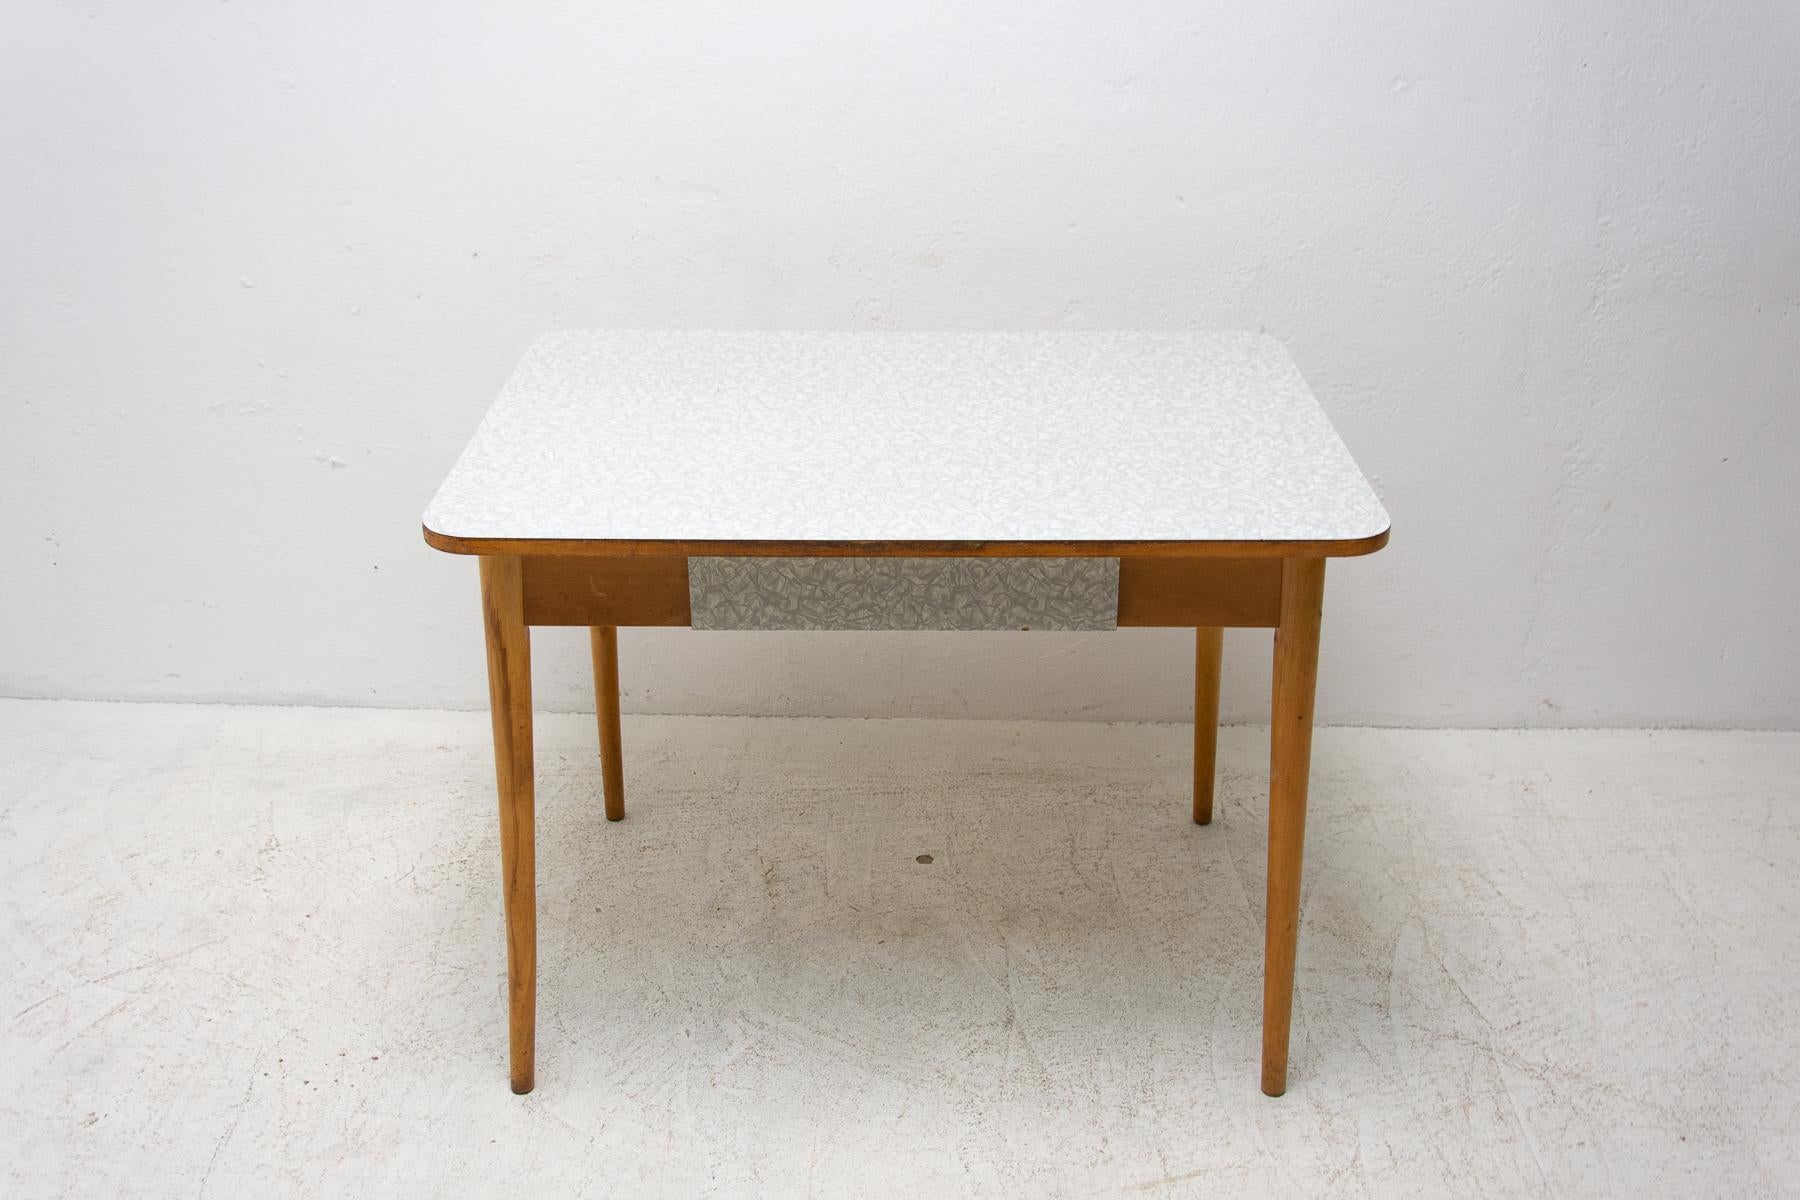  Midcentury Formica and Wood Central Table, Czechoslovakia, 1960's For Sale 9